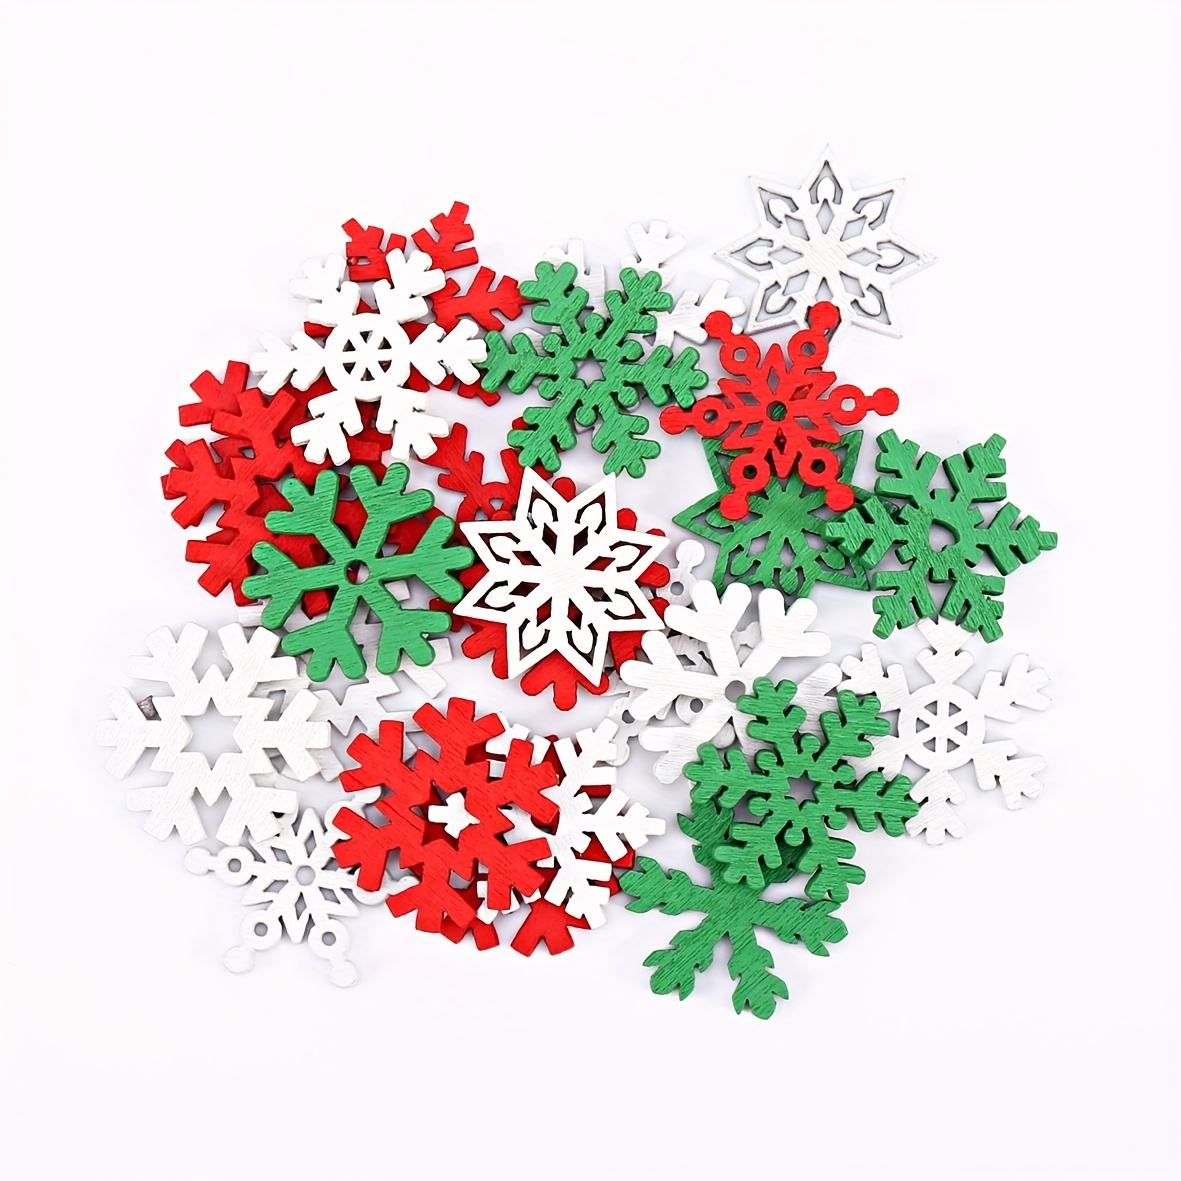 50 Pcs Wooden Snowflake Crafts Snowflakes Supplies Christmas Decorations  Winter 